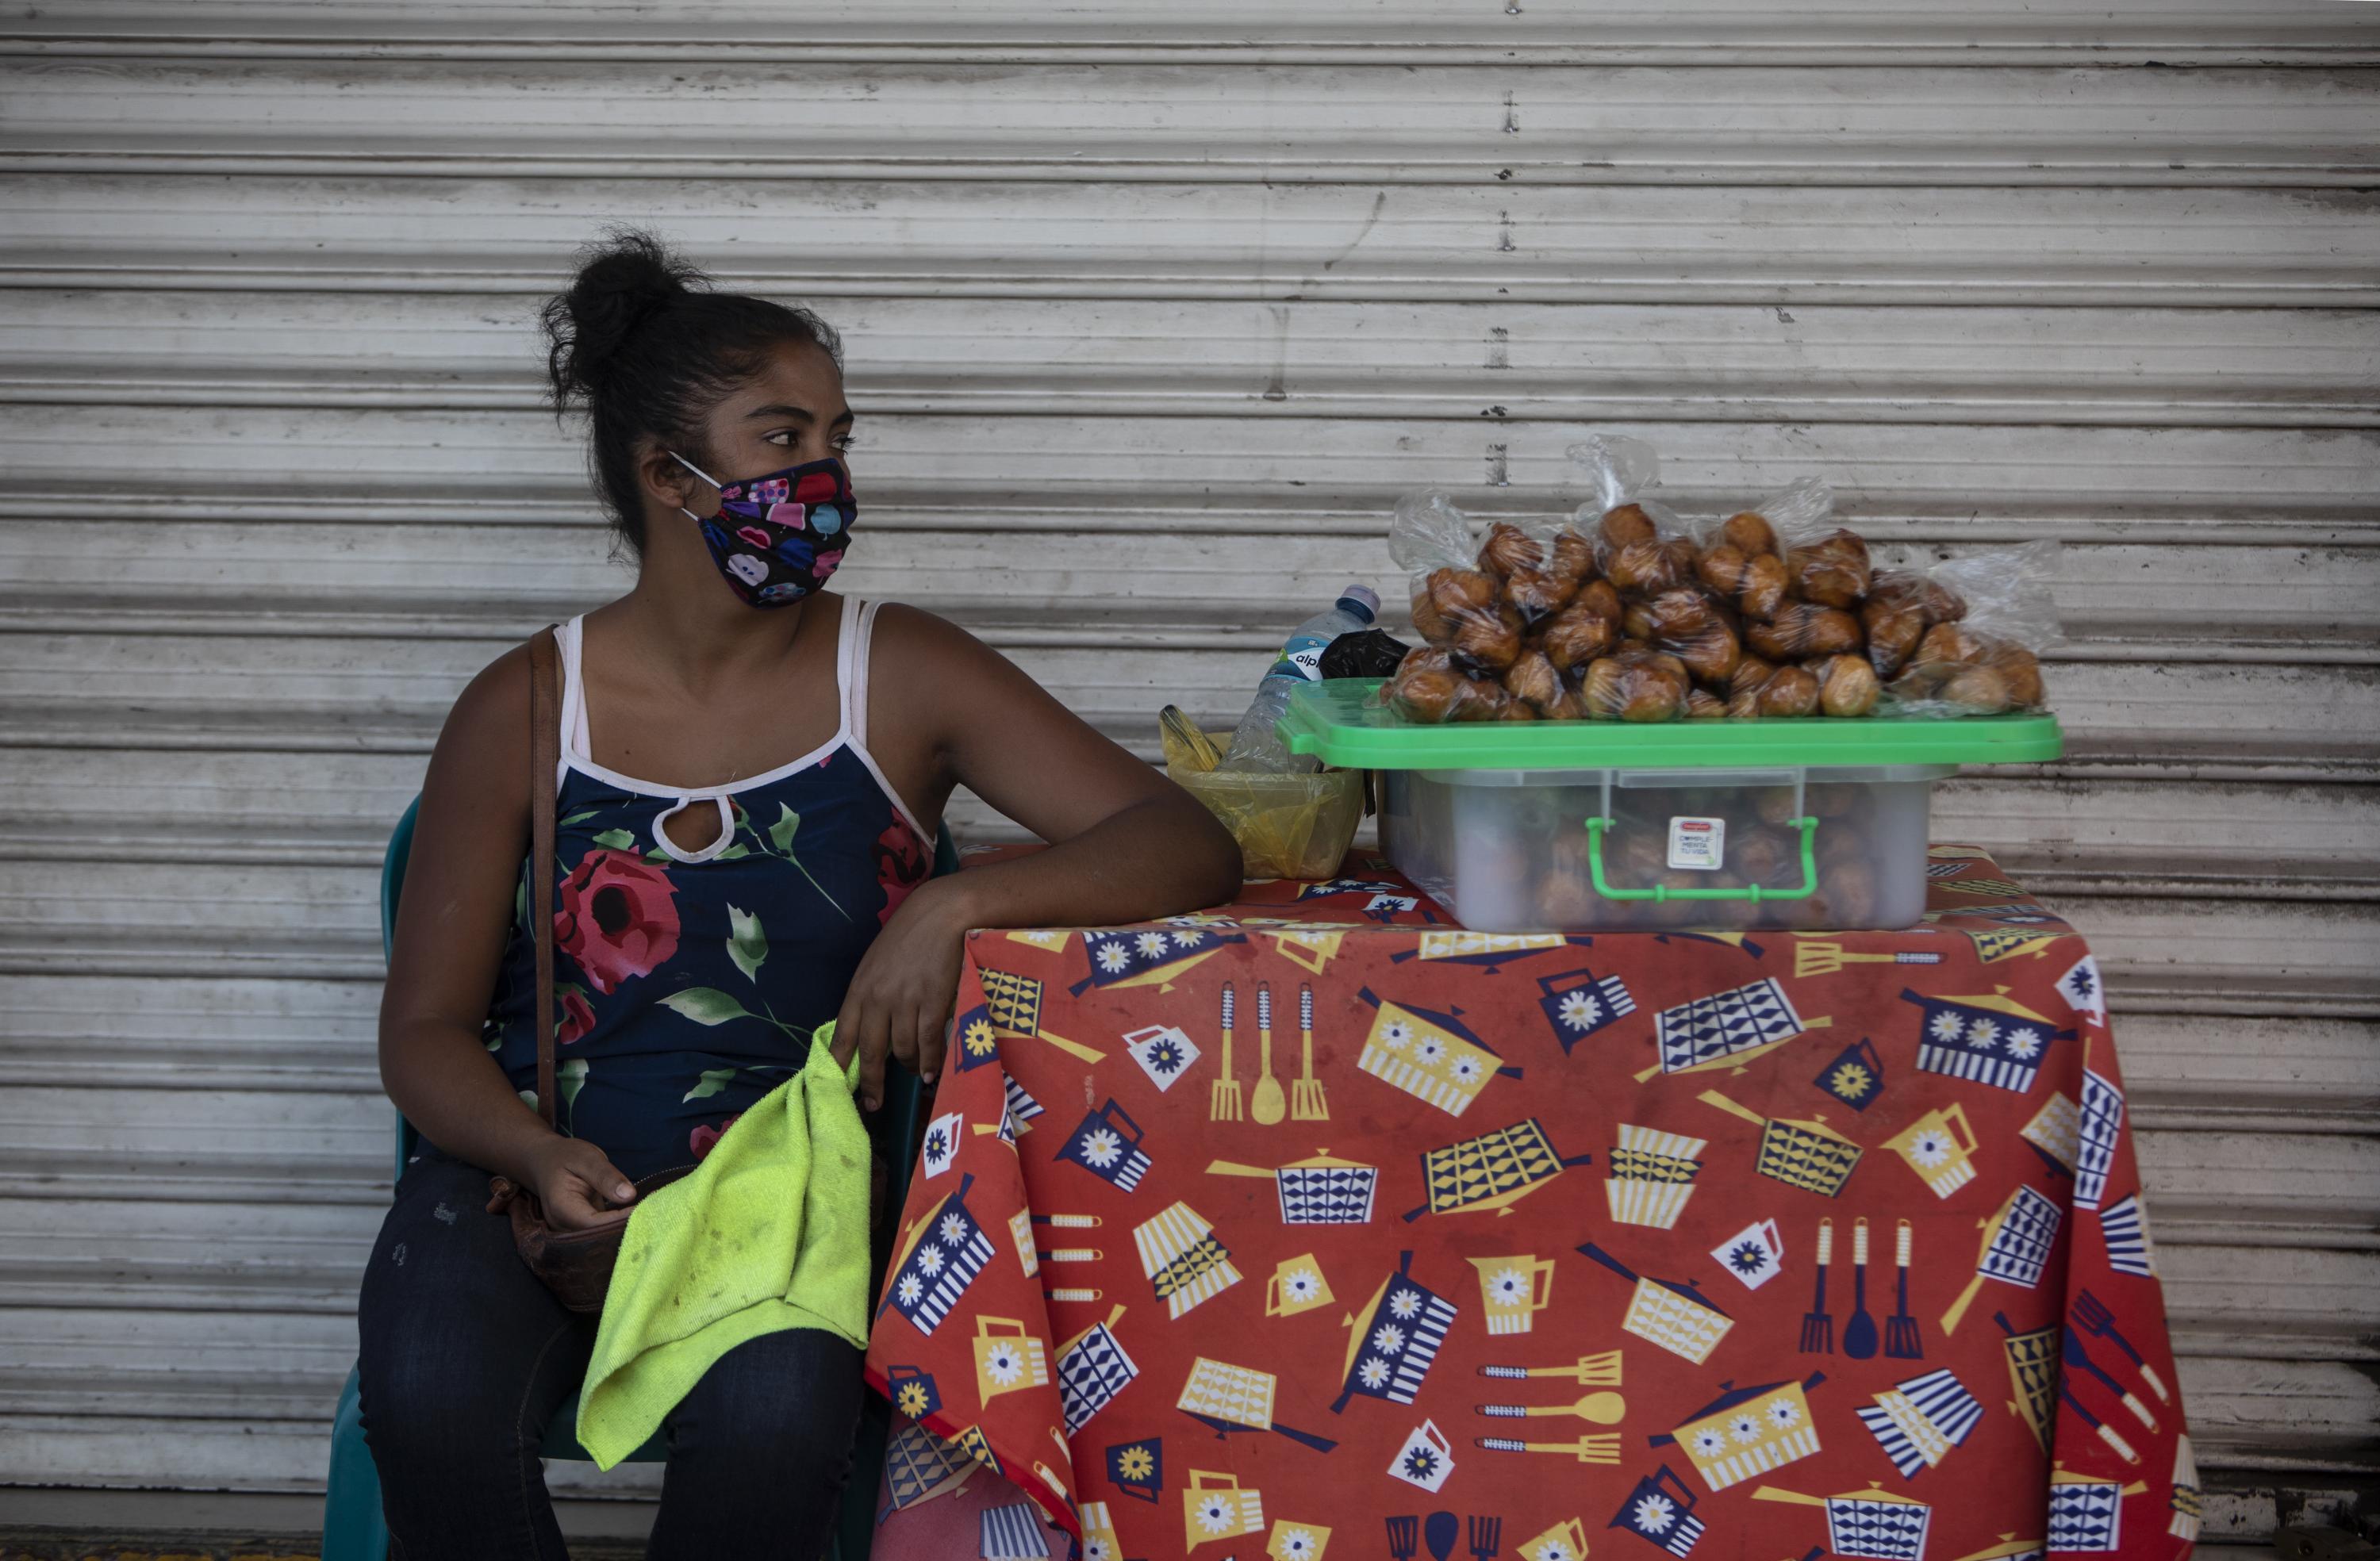 A woman wearing a face masks sells food in Nicaragua